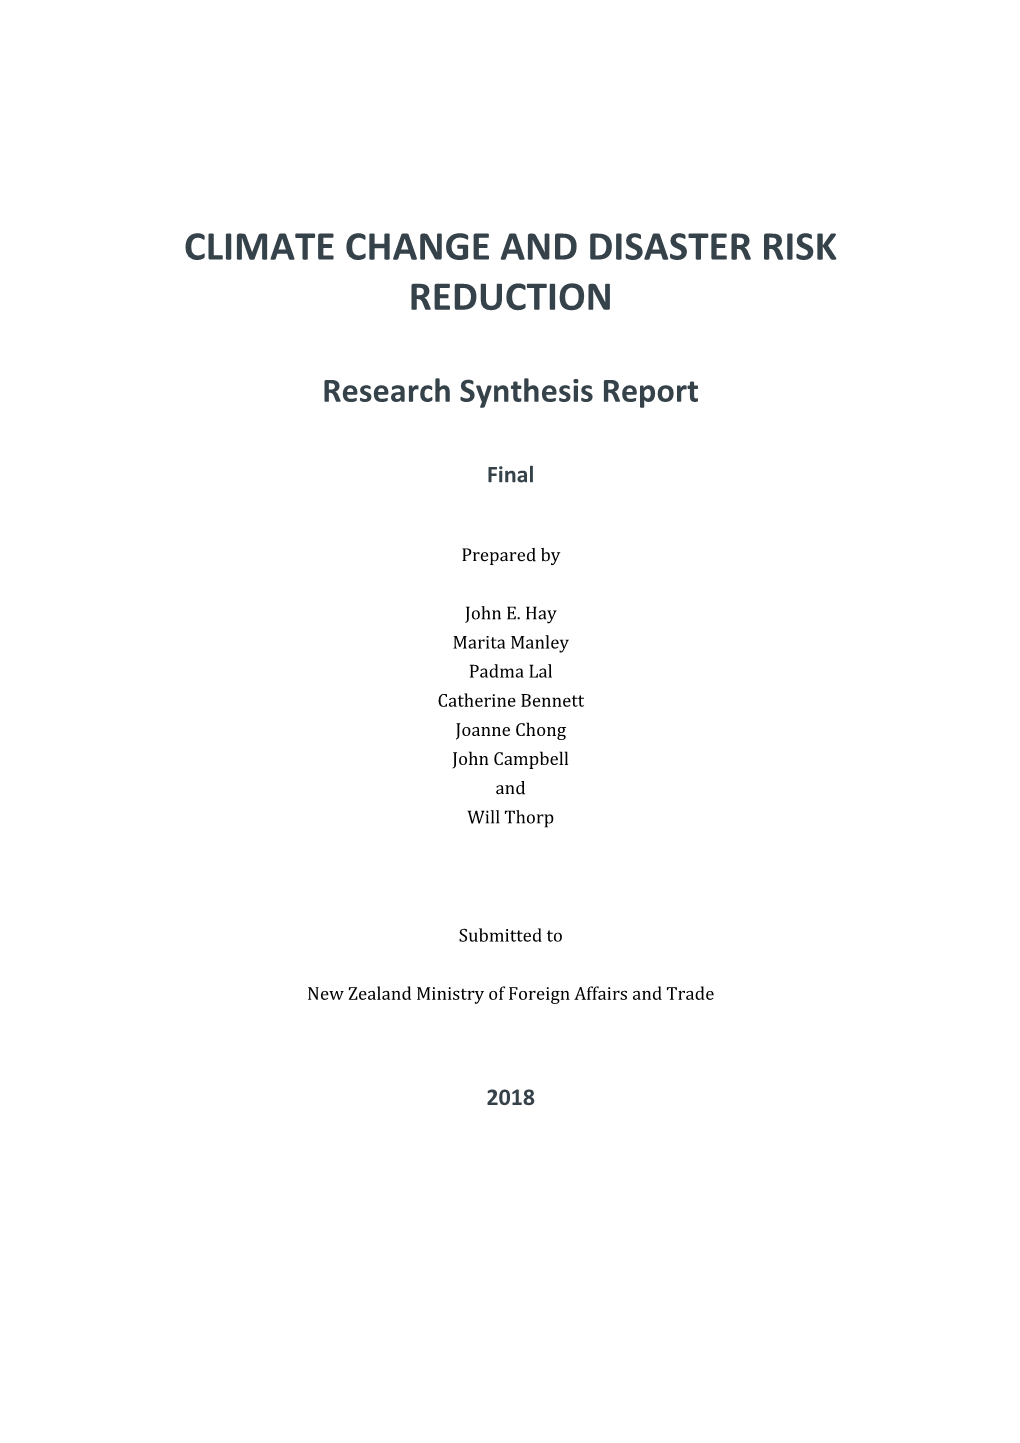 Climate Change and Disaster Risk Reduction: Research Synthesis Report